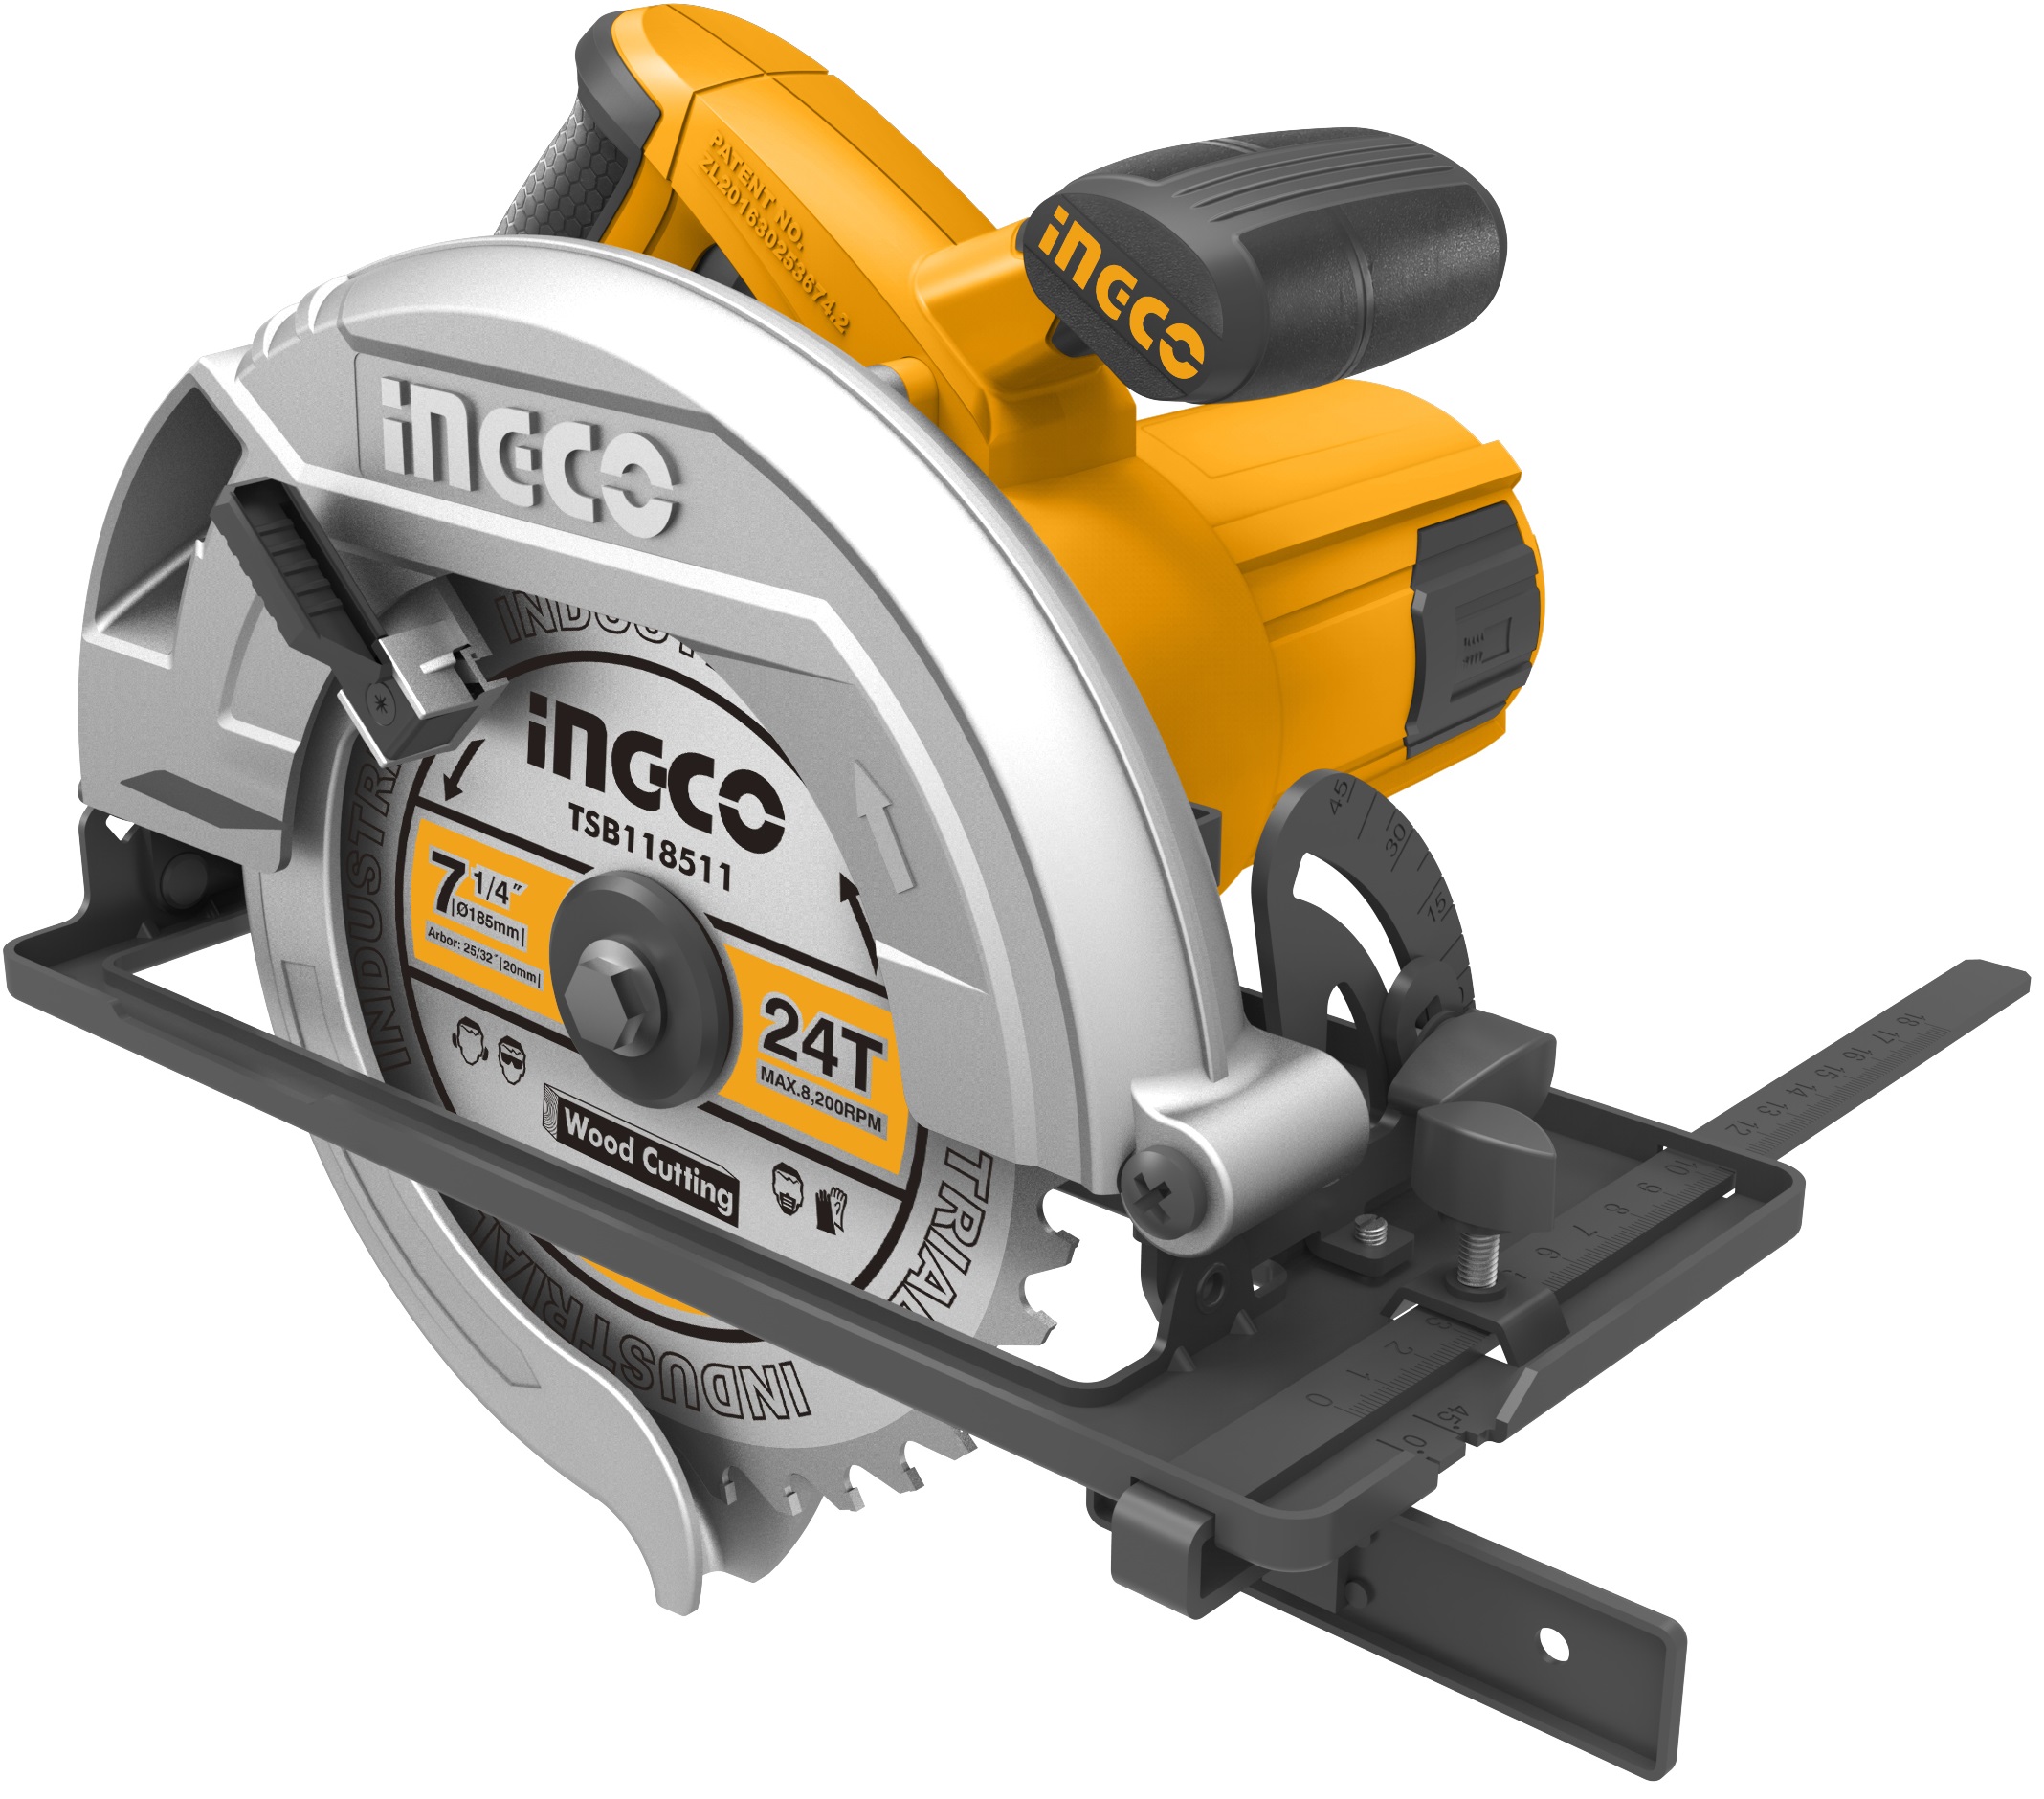 Voltage:220-240v~50/60hz. Input power:1600w. No-load speed:5000rpm. Blade diameter:185x20mm. Cutting capacity: 45 degree:45mm. 90 degree:65mm. Adjustable cutting depth. Adjustable bevel cutting with 1pcs 185mm blade, with 1 set extra carbon brushes, packed